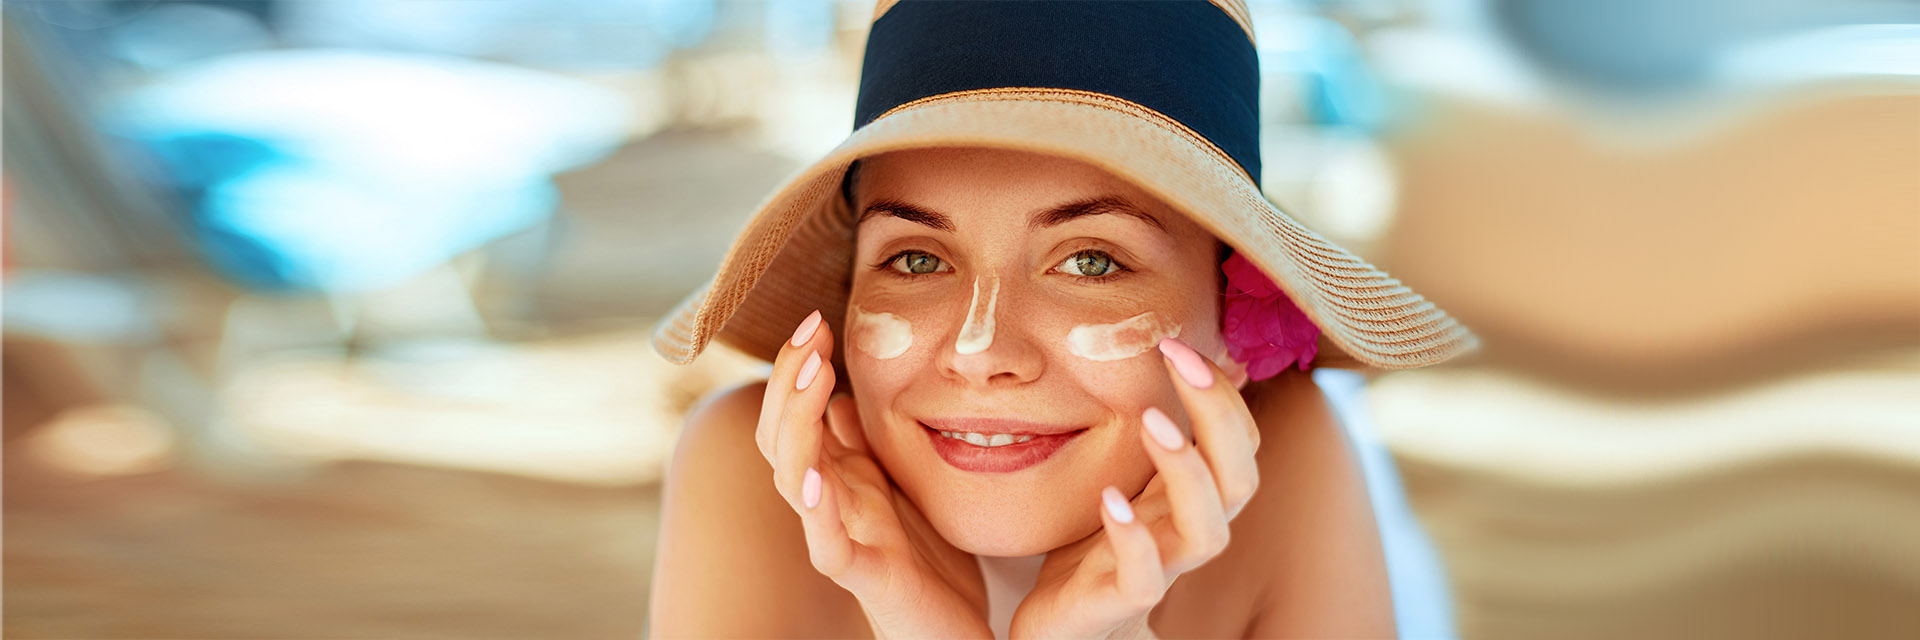 Woman in hat putting on sunscreen